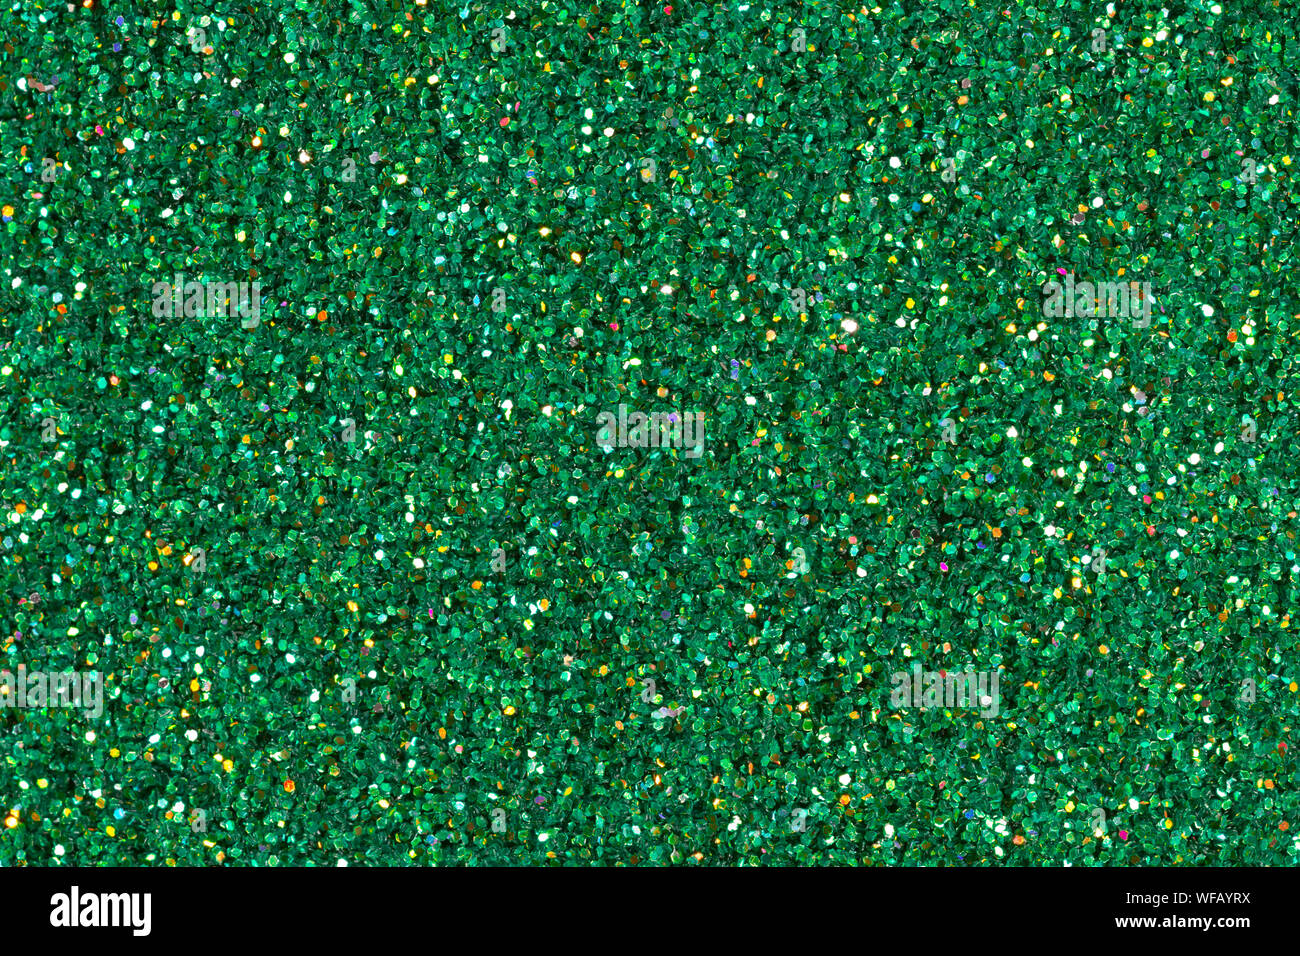 Green Glitter Background With Emerald High Quality Texture In Extremely High Resolution Stock Photo Alamy